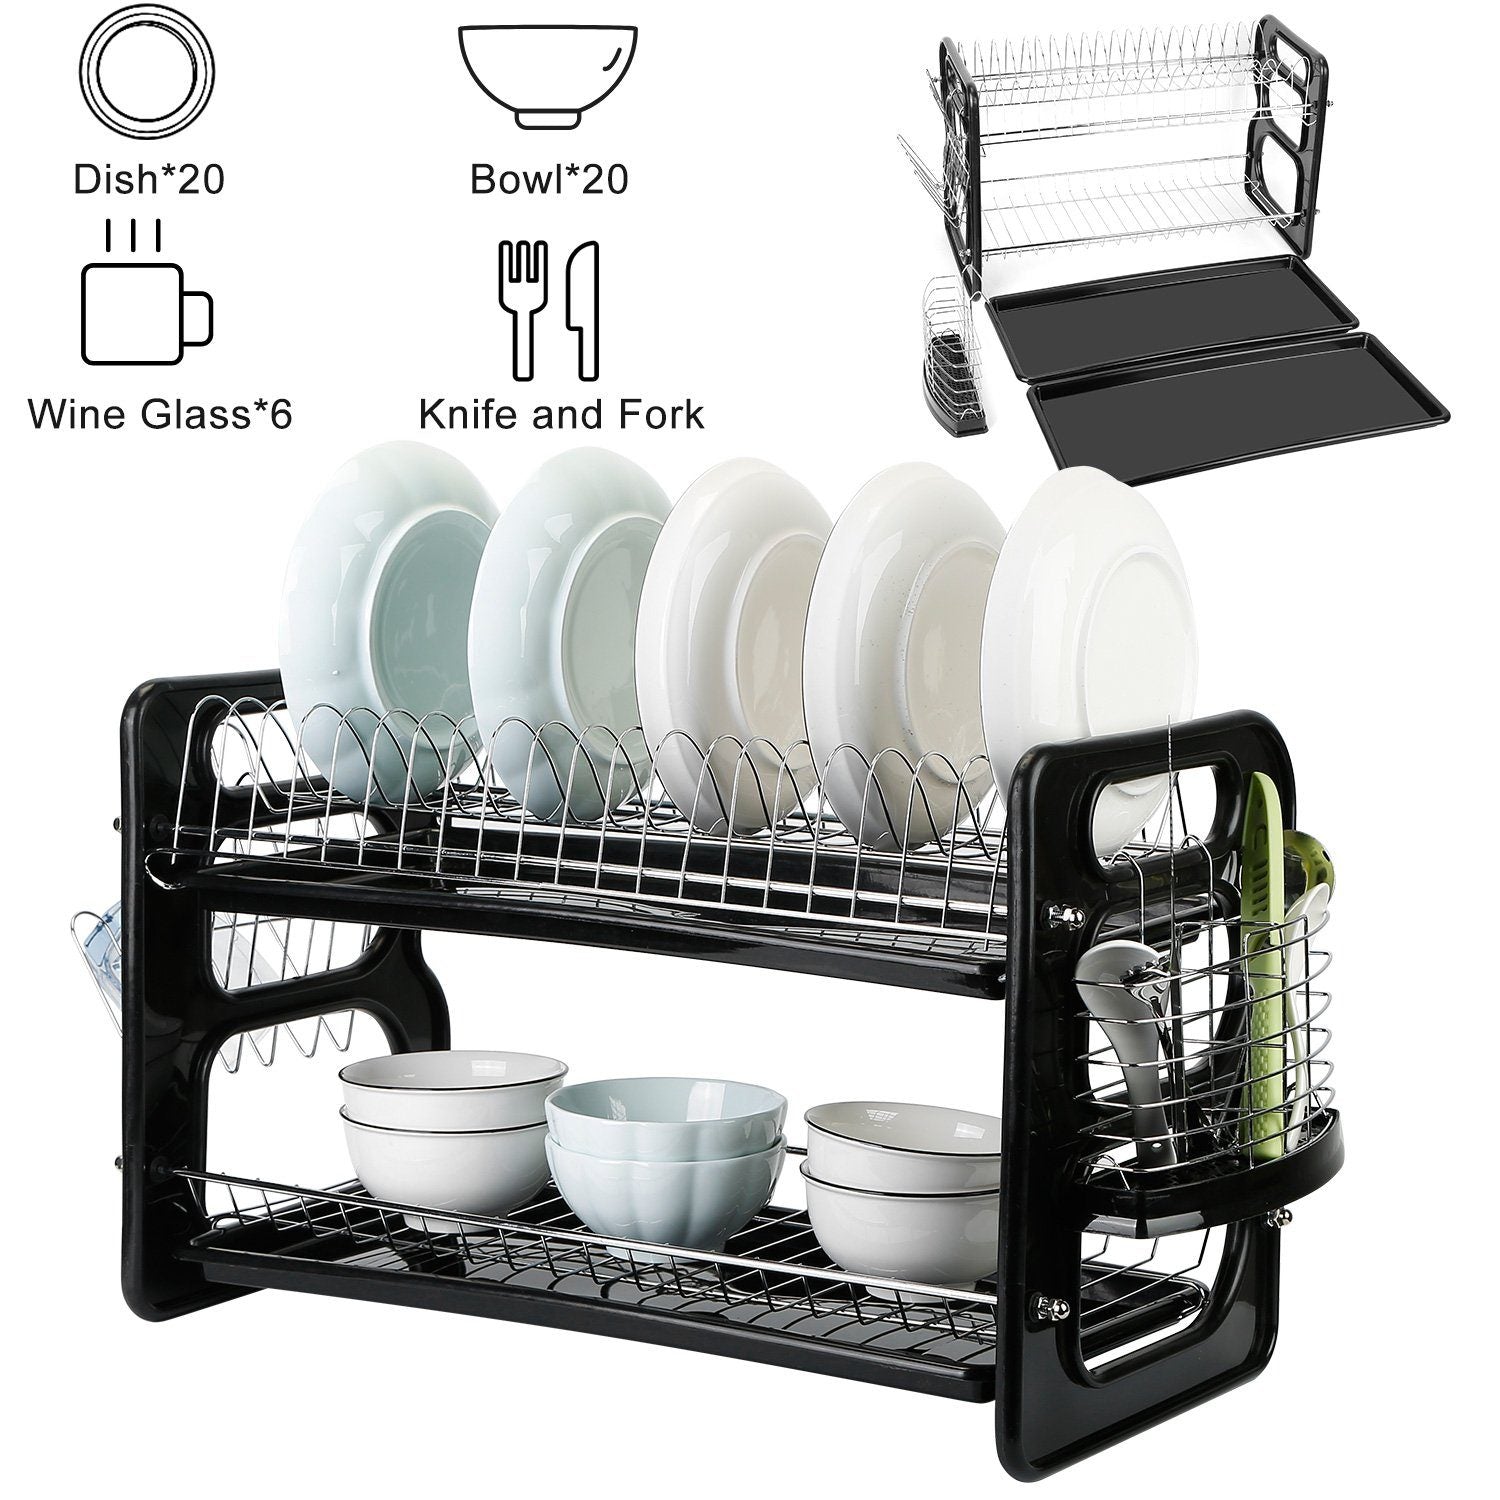 2 Tier Dish Drying Rack With Drainboard Tray Plastic Dish Rack Holder for  Bowls